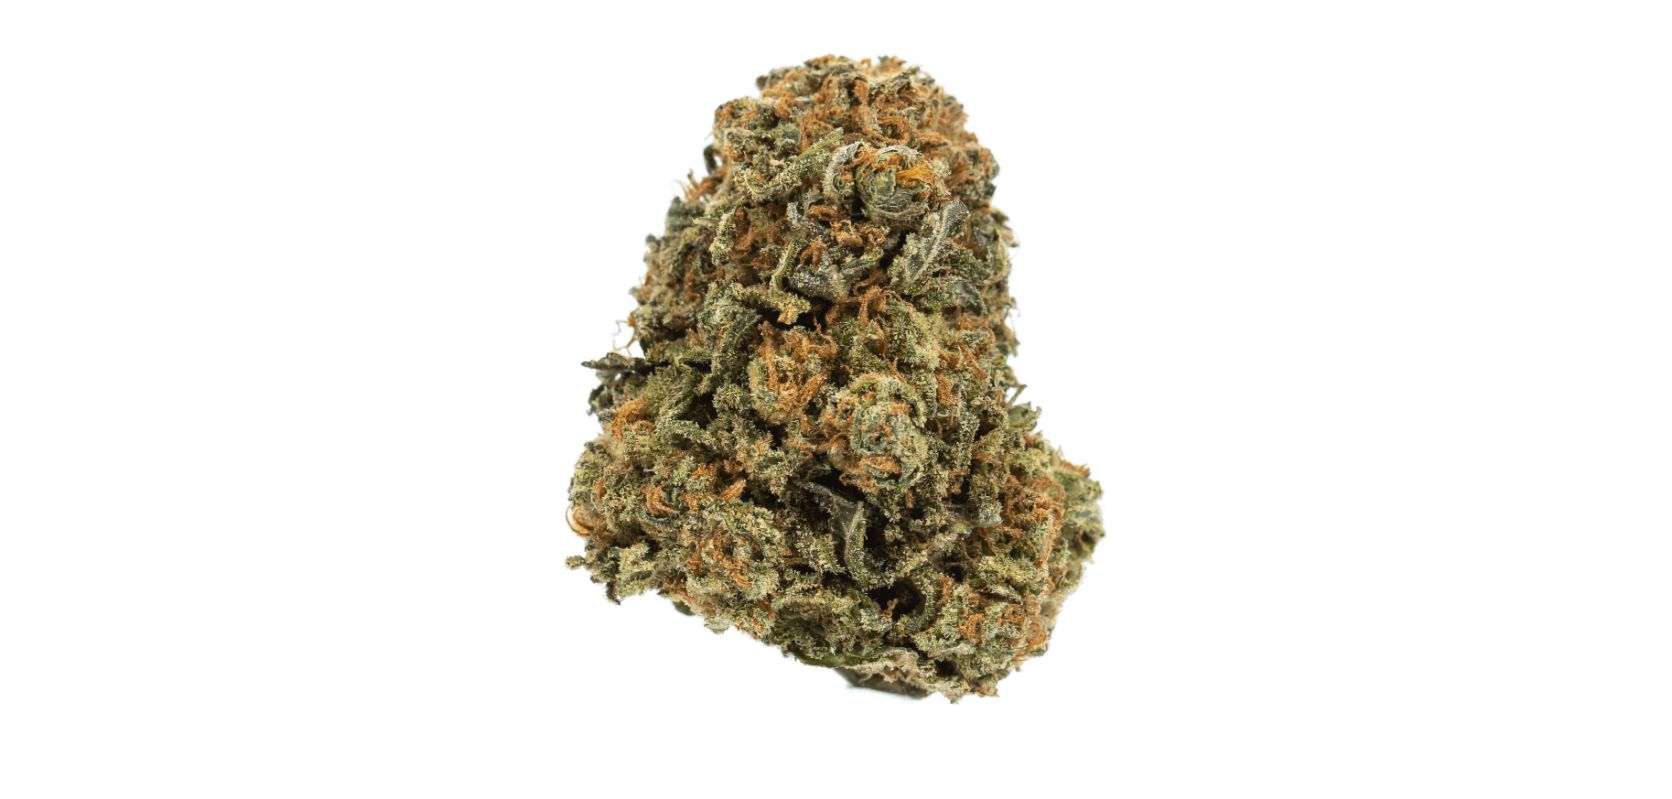 Duke Nukem Weed, among other cannabis products, is available in online dispensaries in Canada.